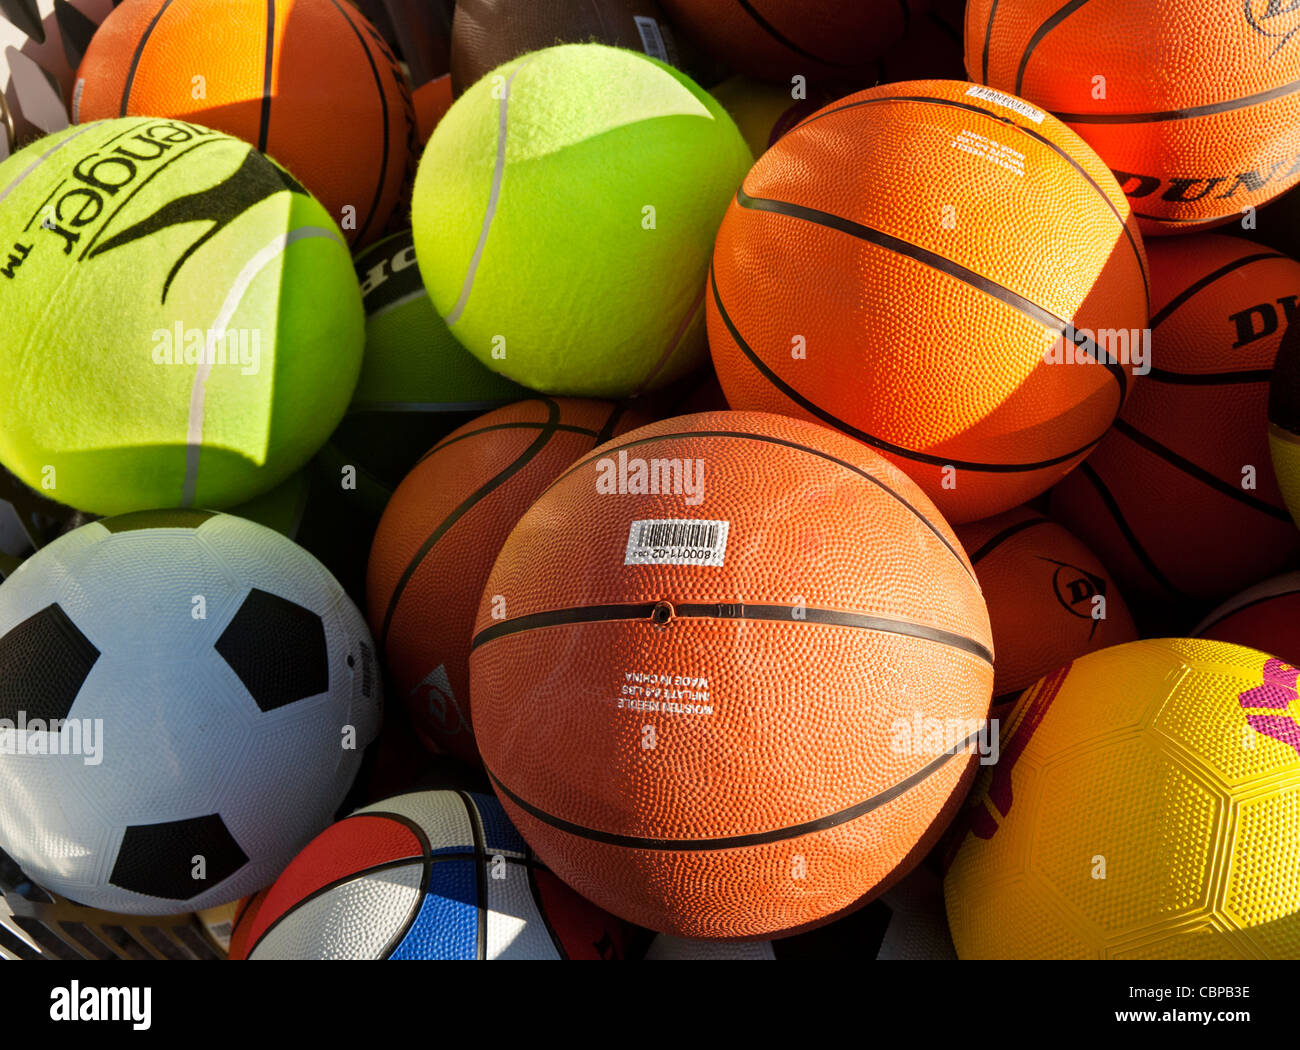 A collection of assorted sports balls Stock Photo - Alamy